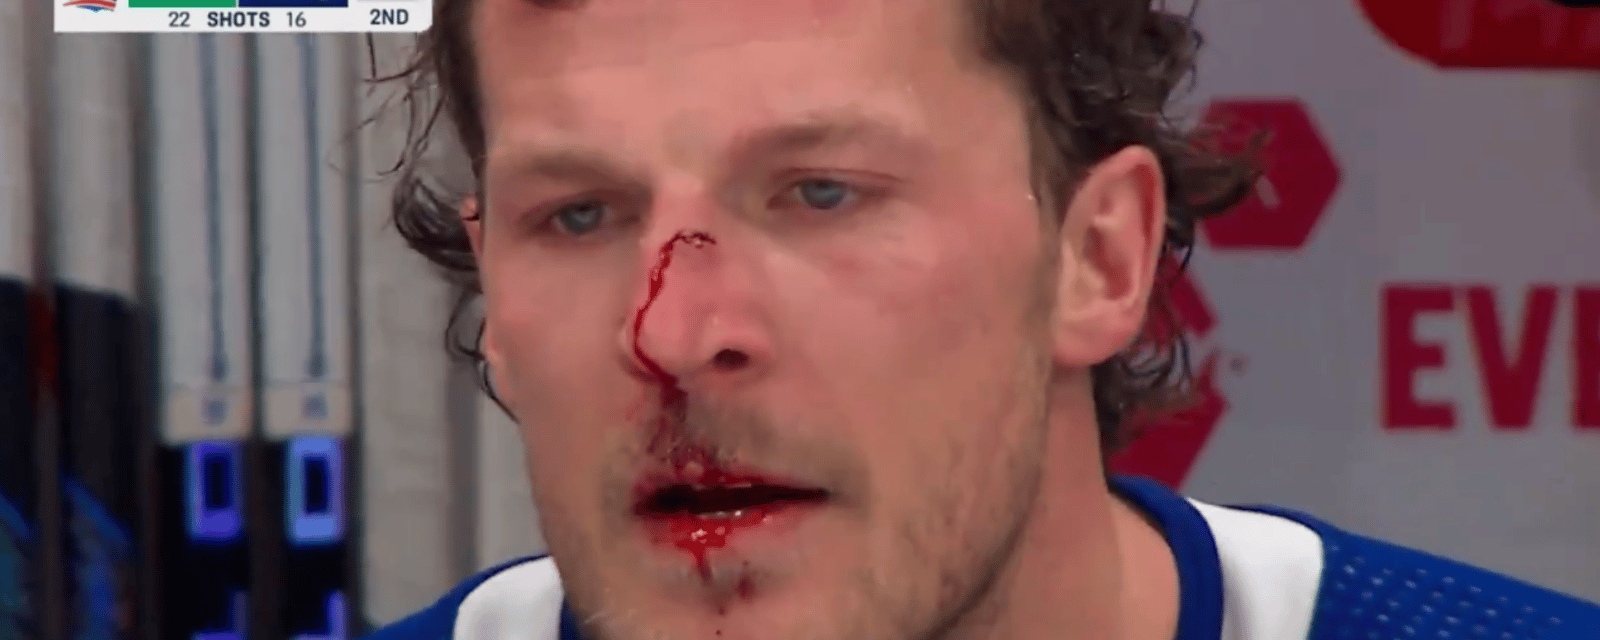 Bloodied Jake McCabe EXPLODES on referees after late blindside hit 